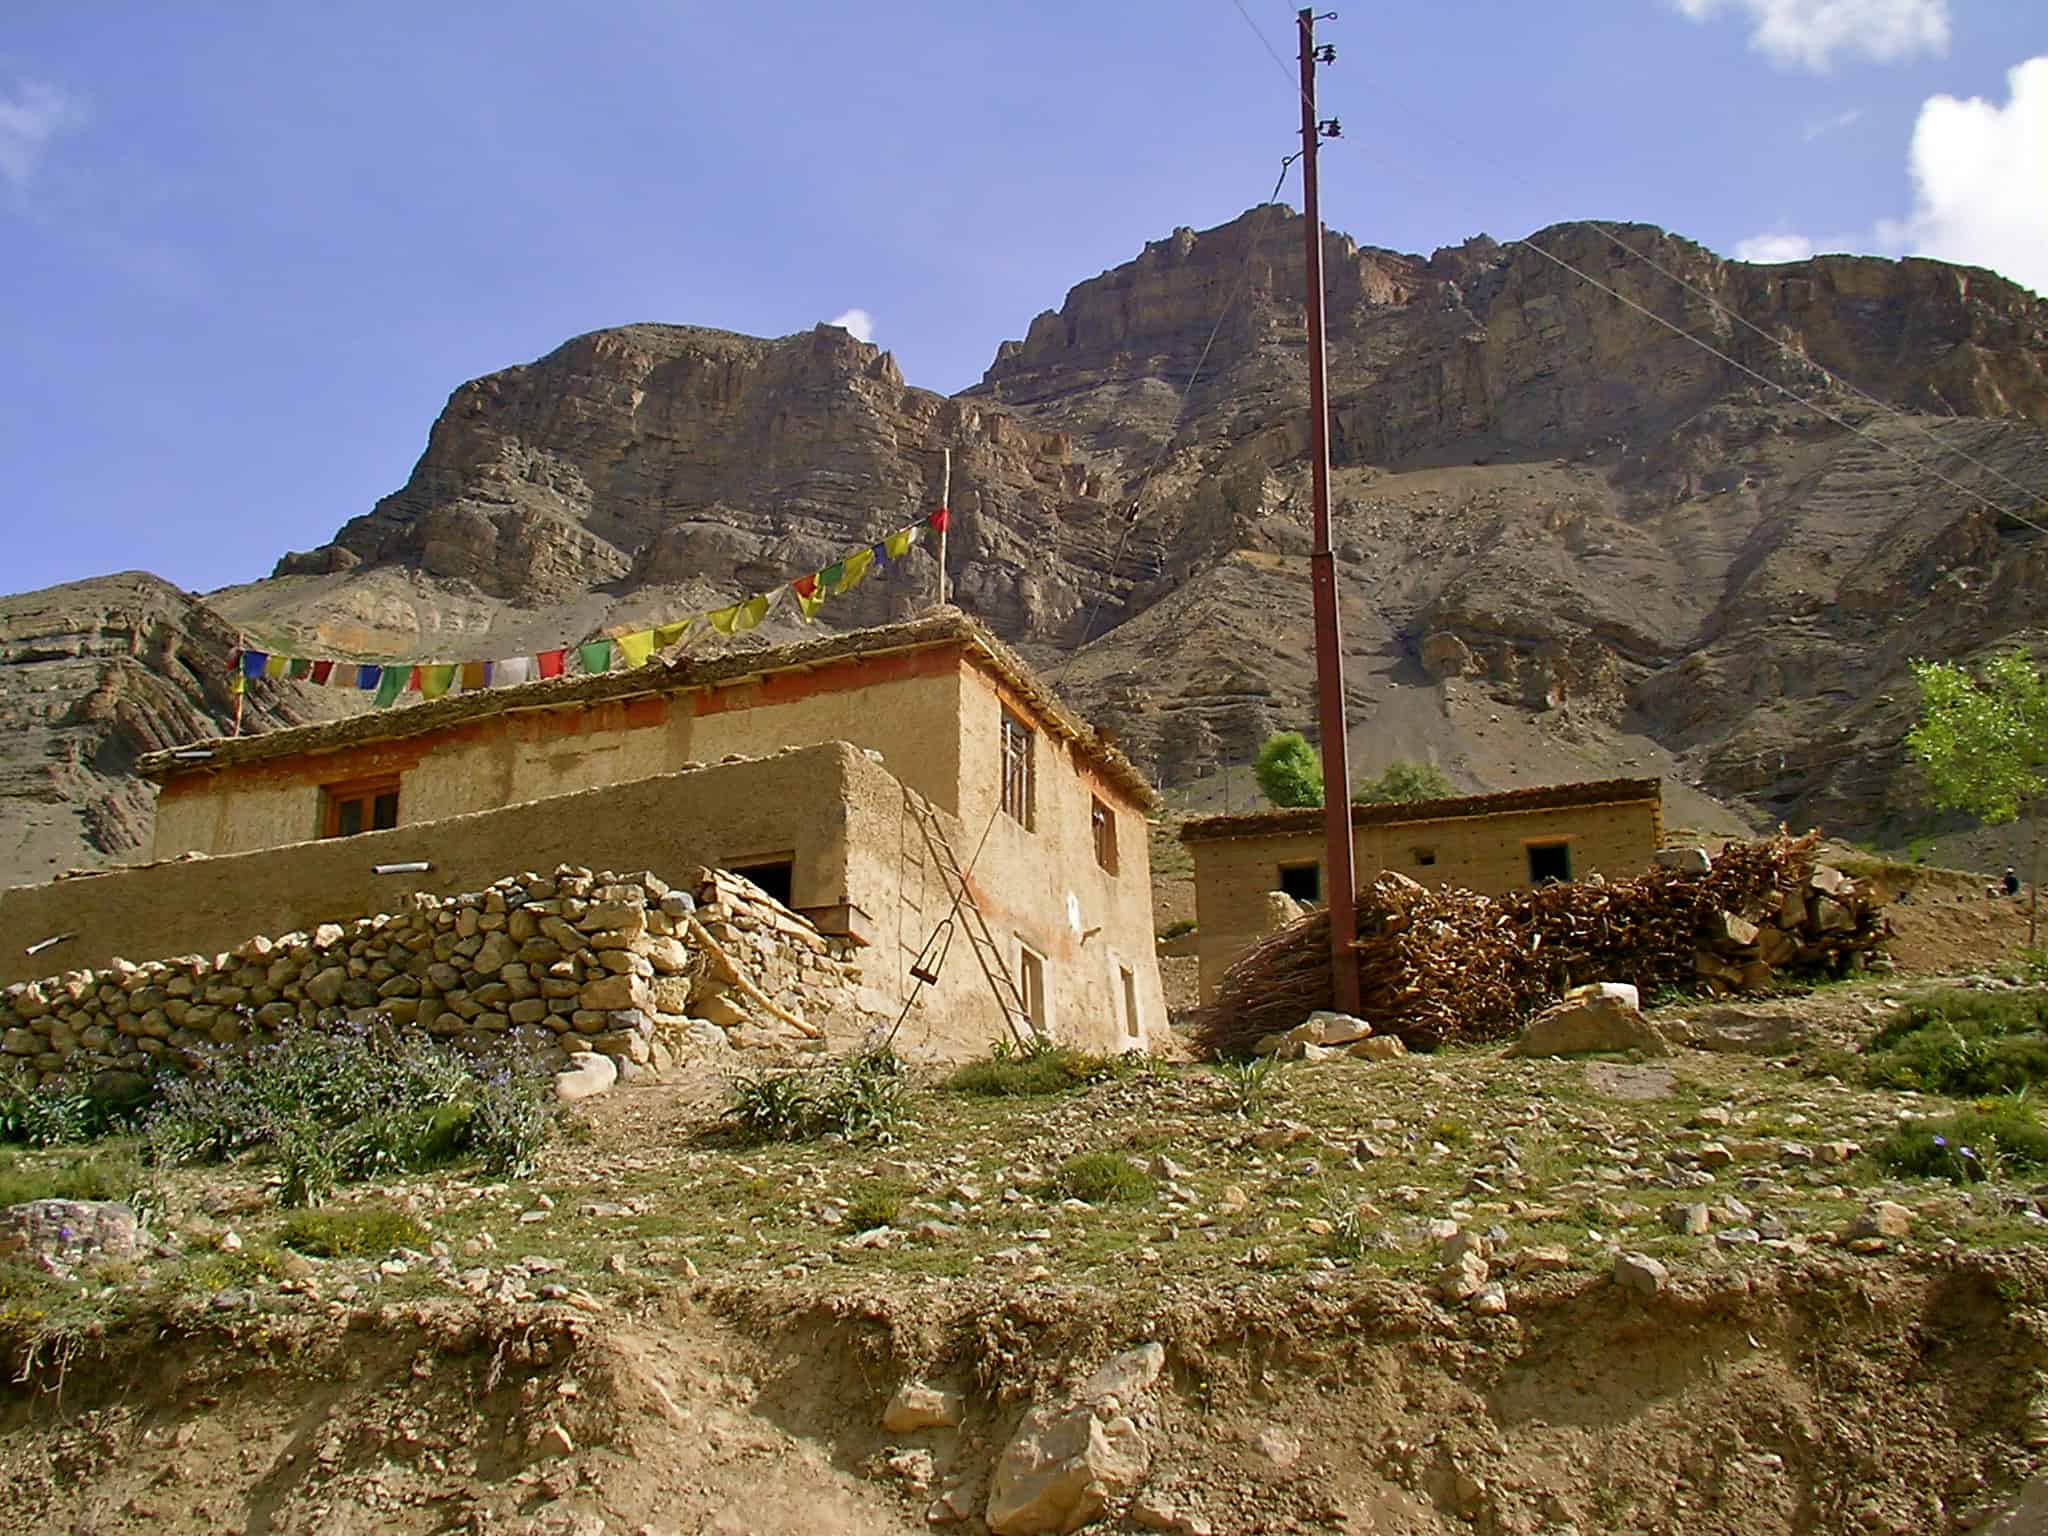 Fukchung spiti, Spiti nuns, things to do in spiti valley, Pin valley